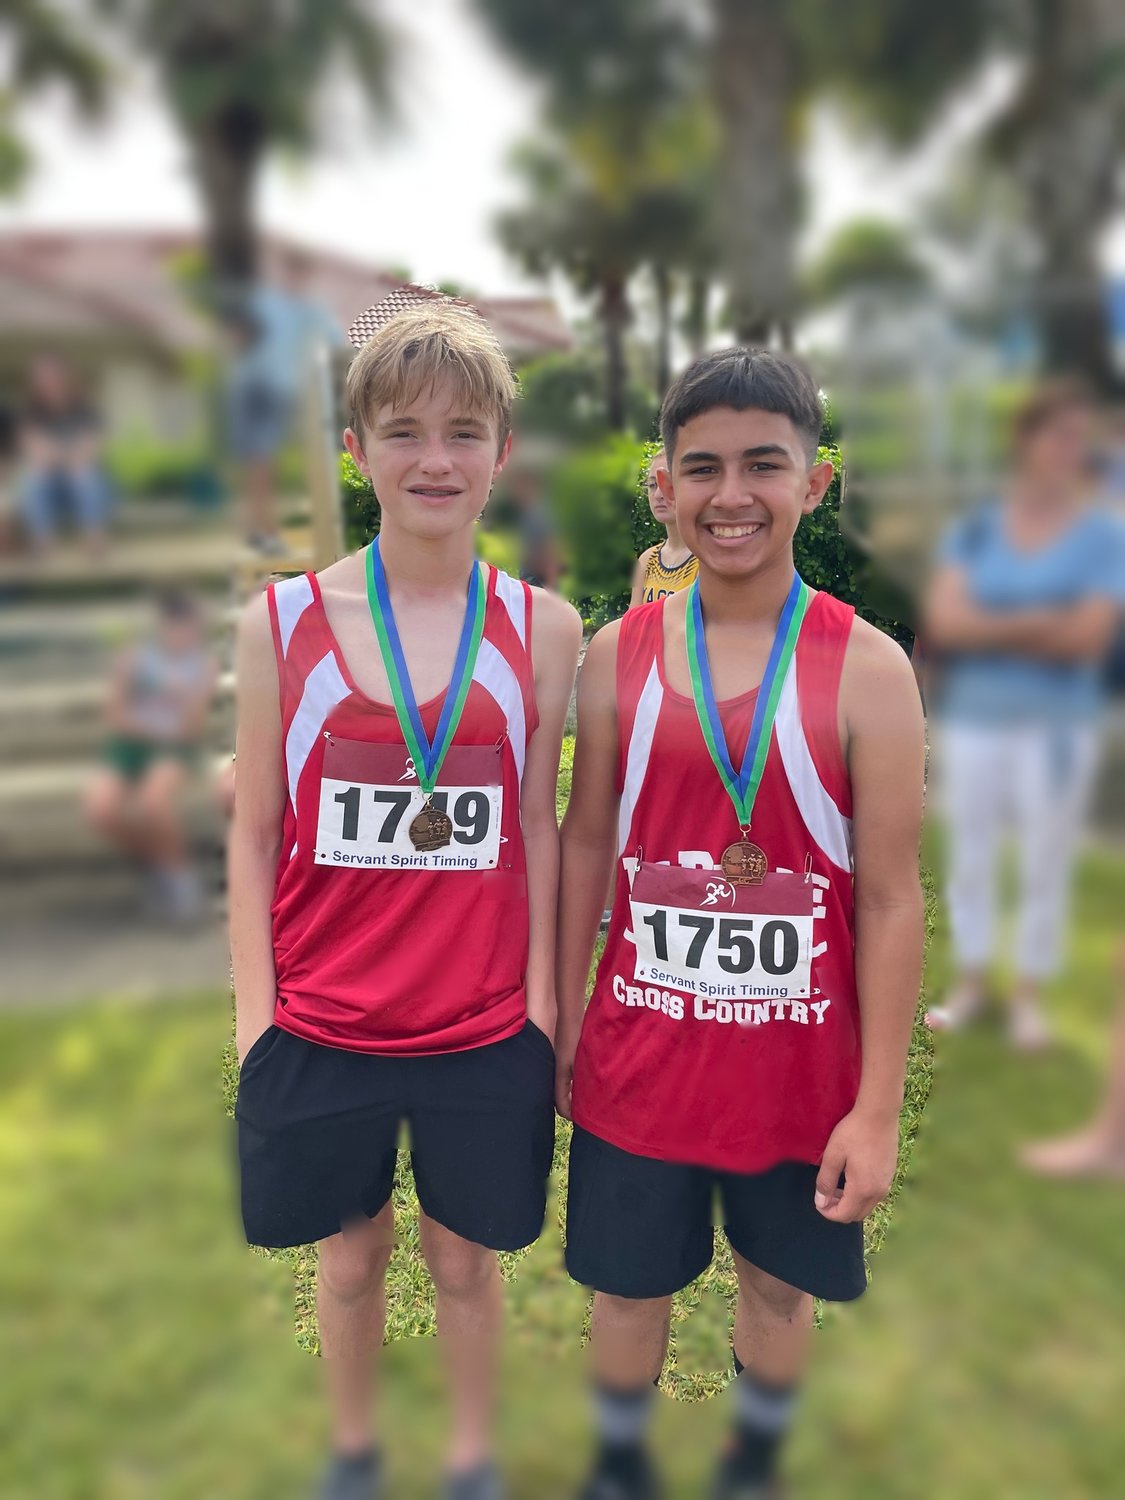 LaBelle Middle School students Ryan R. Bowen (left) and Orlando Camacho (right)qualified for the state meet during their first Cross Country meet.